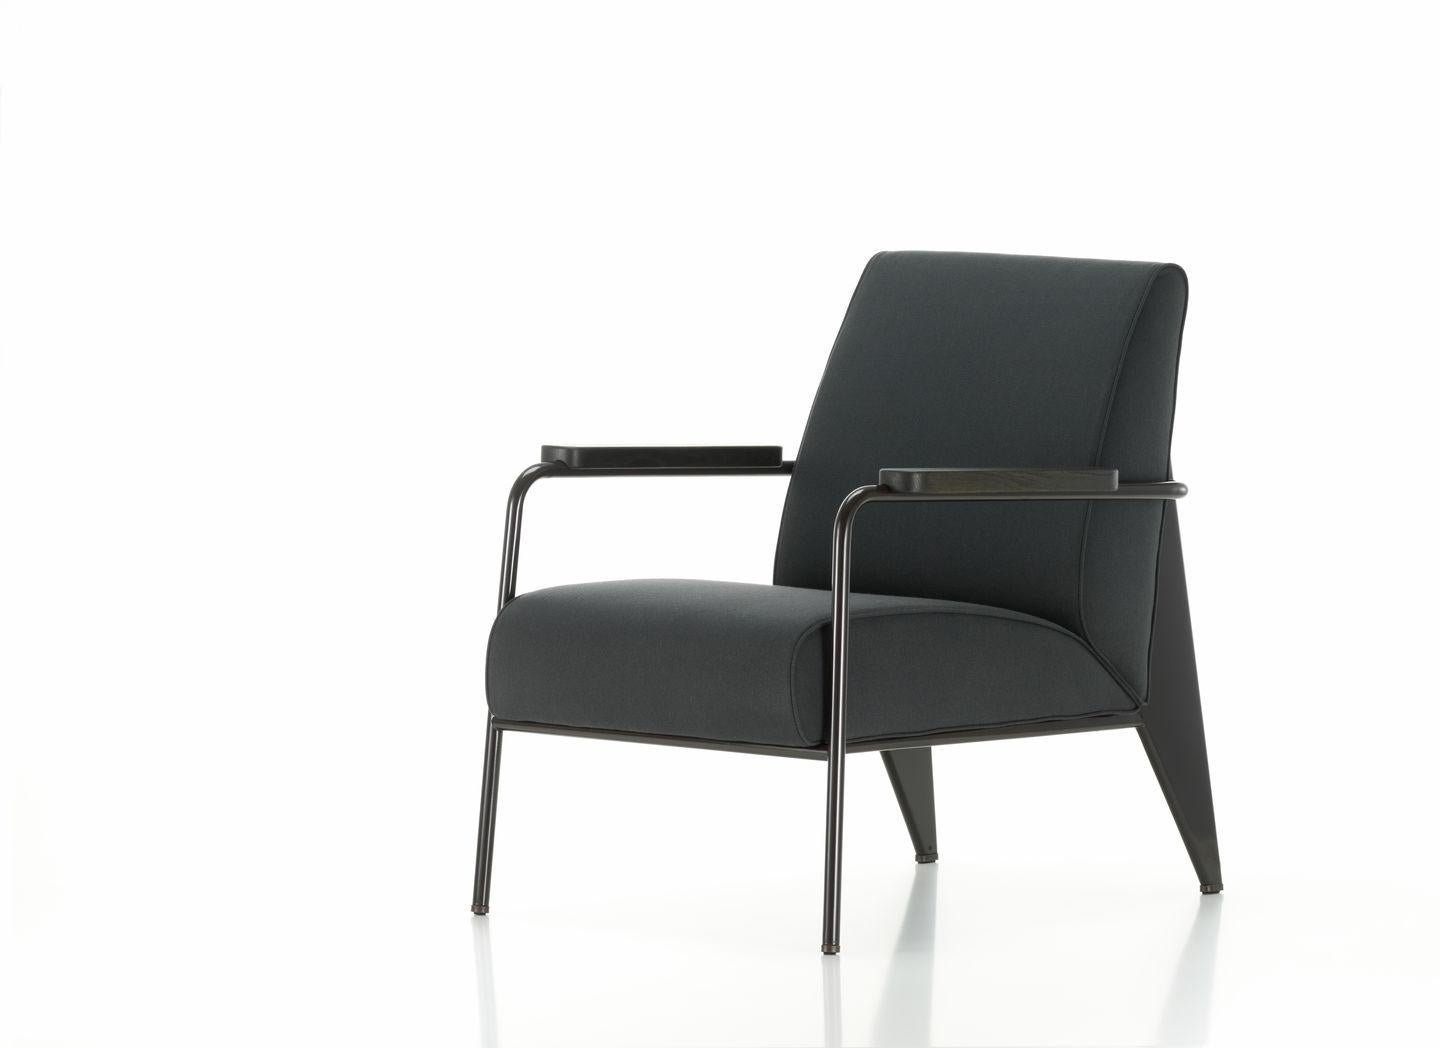 Armchair designed by Jean Prouvé in 1939.
Manufactured by Vitra, Switzerland.

Developed by Jean Prouvé, the Fauteuil de Salon is a typical example of the distinctive structural aesthetic of his designs. The armchair's understated character suits